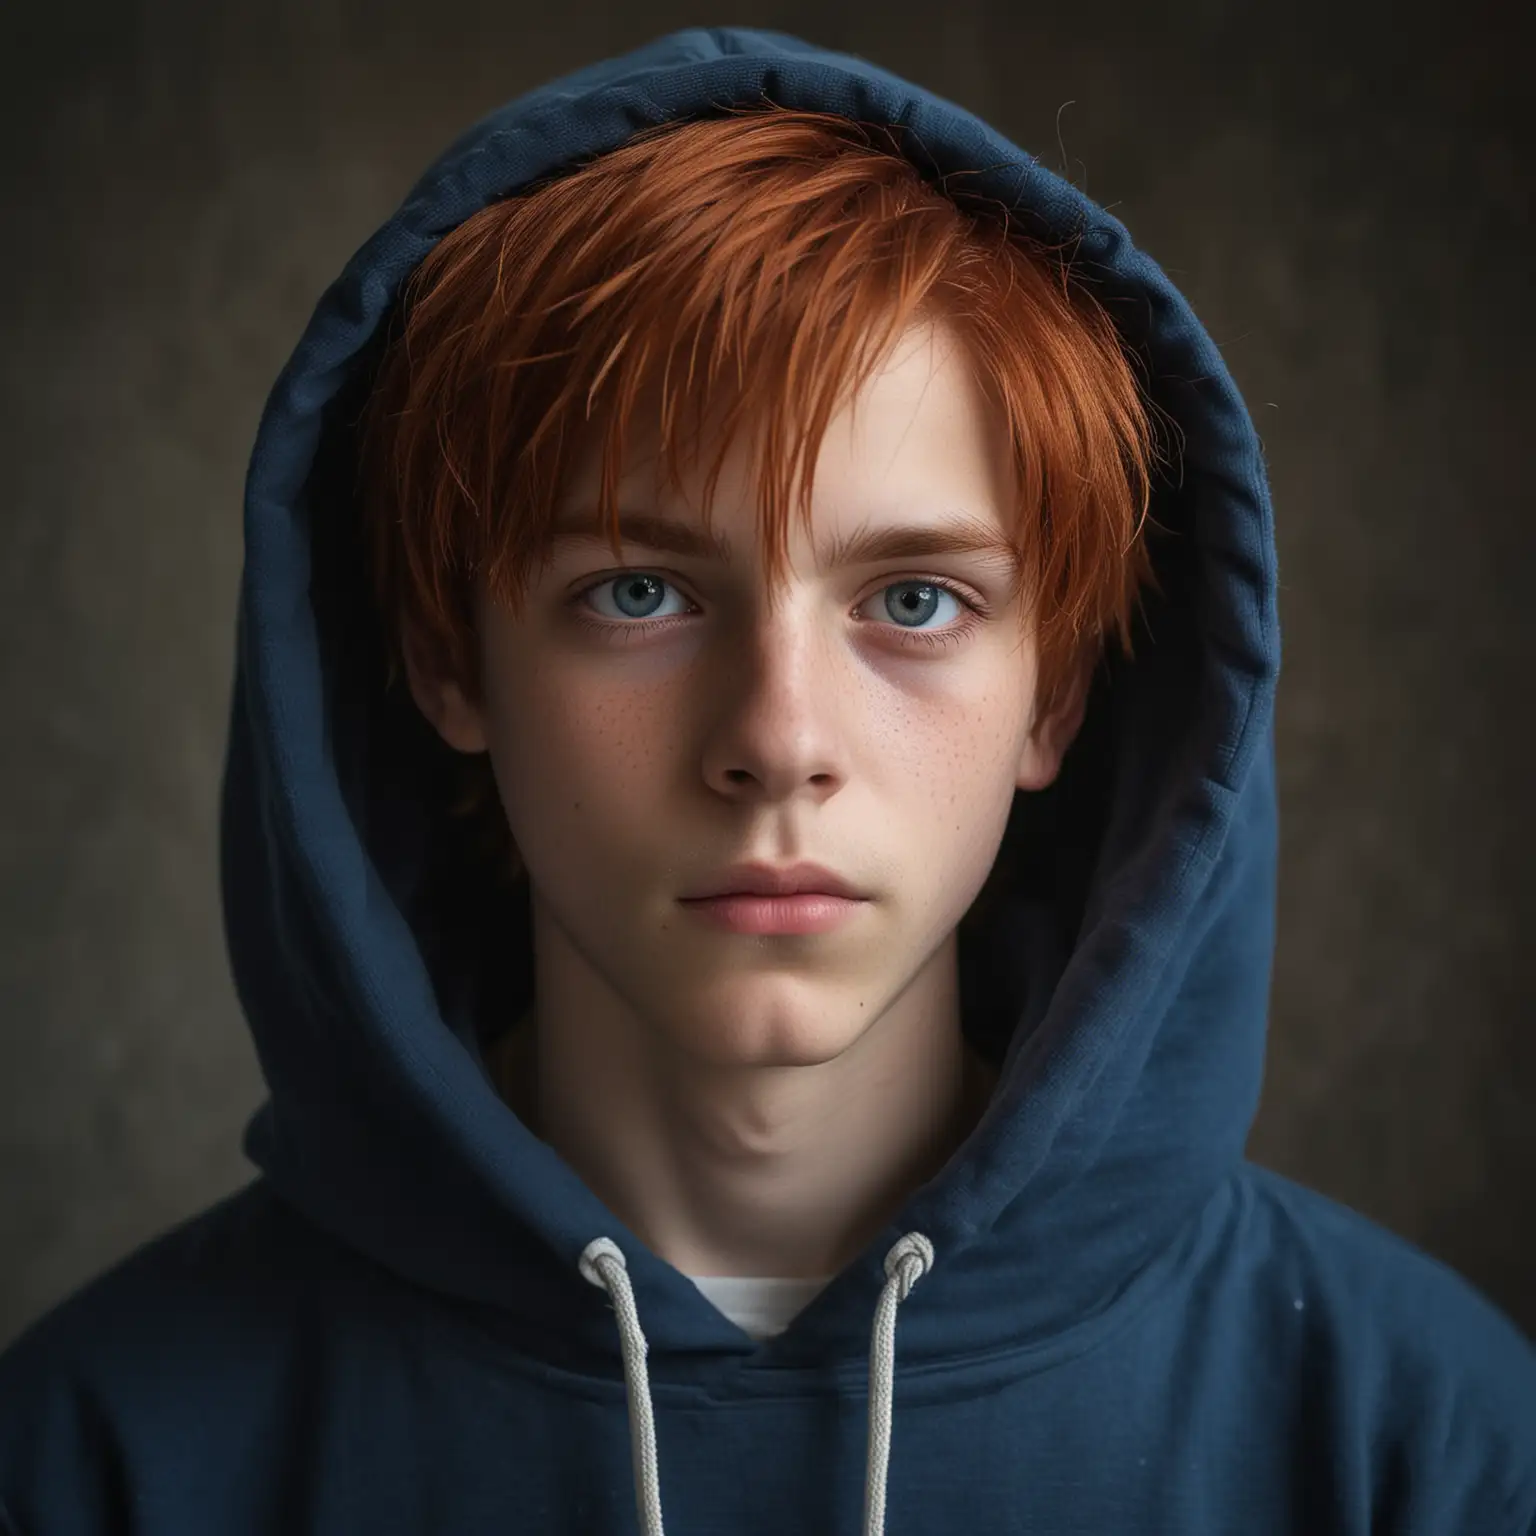 Dreamy Renaissance Portrait of a RedHaired Boy in Blue Hoodie